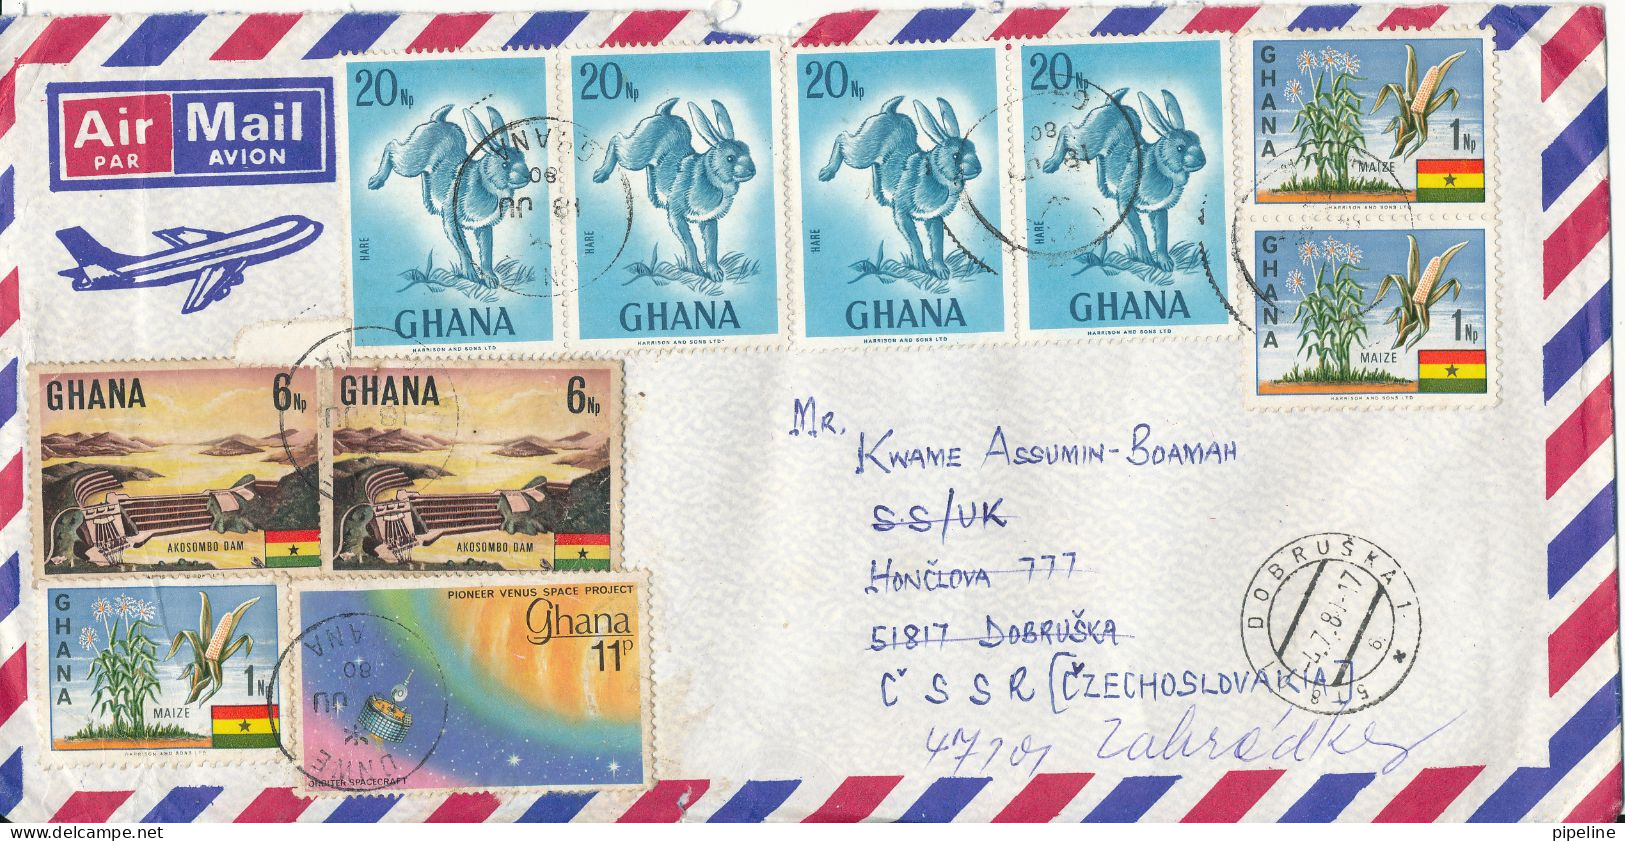 Ghana Air Mail Cover Sent To Czechoslovakia 18-7-1980 With A Lot Of Topic Stamps (small Tears On The Cover) - Ghana (1957-...)